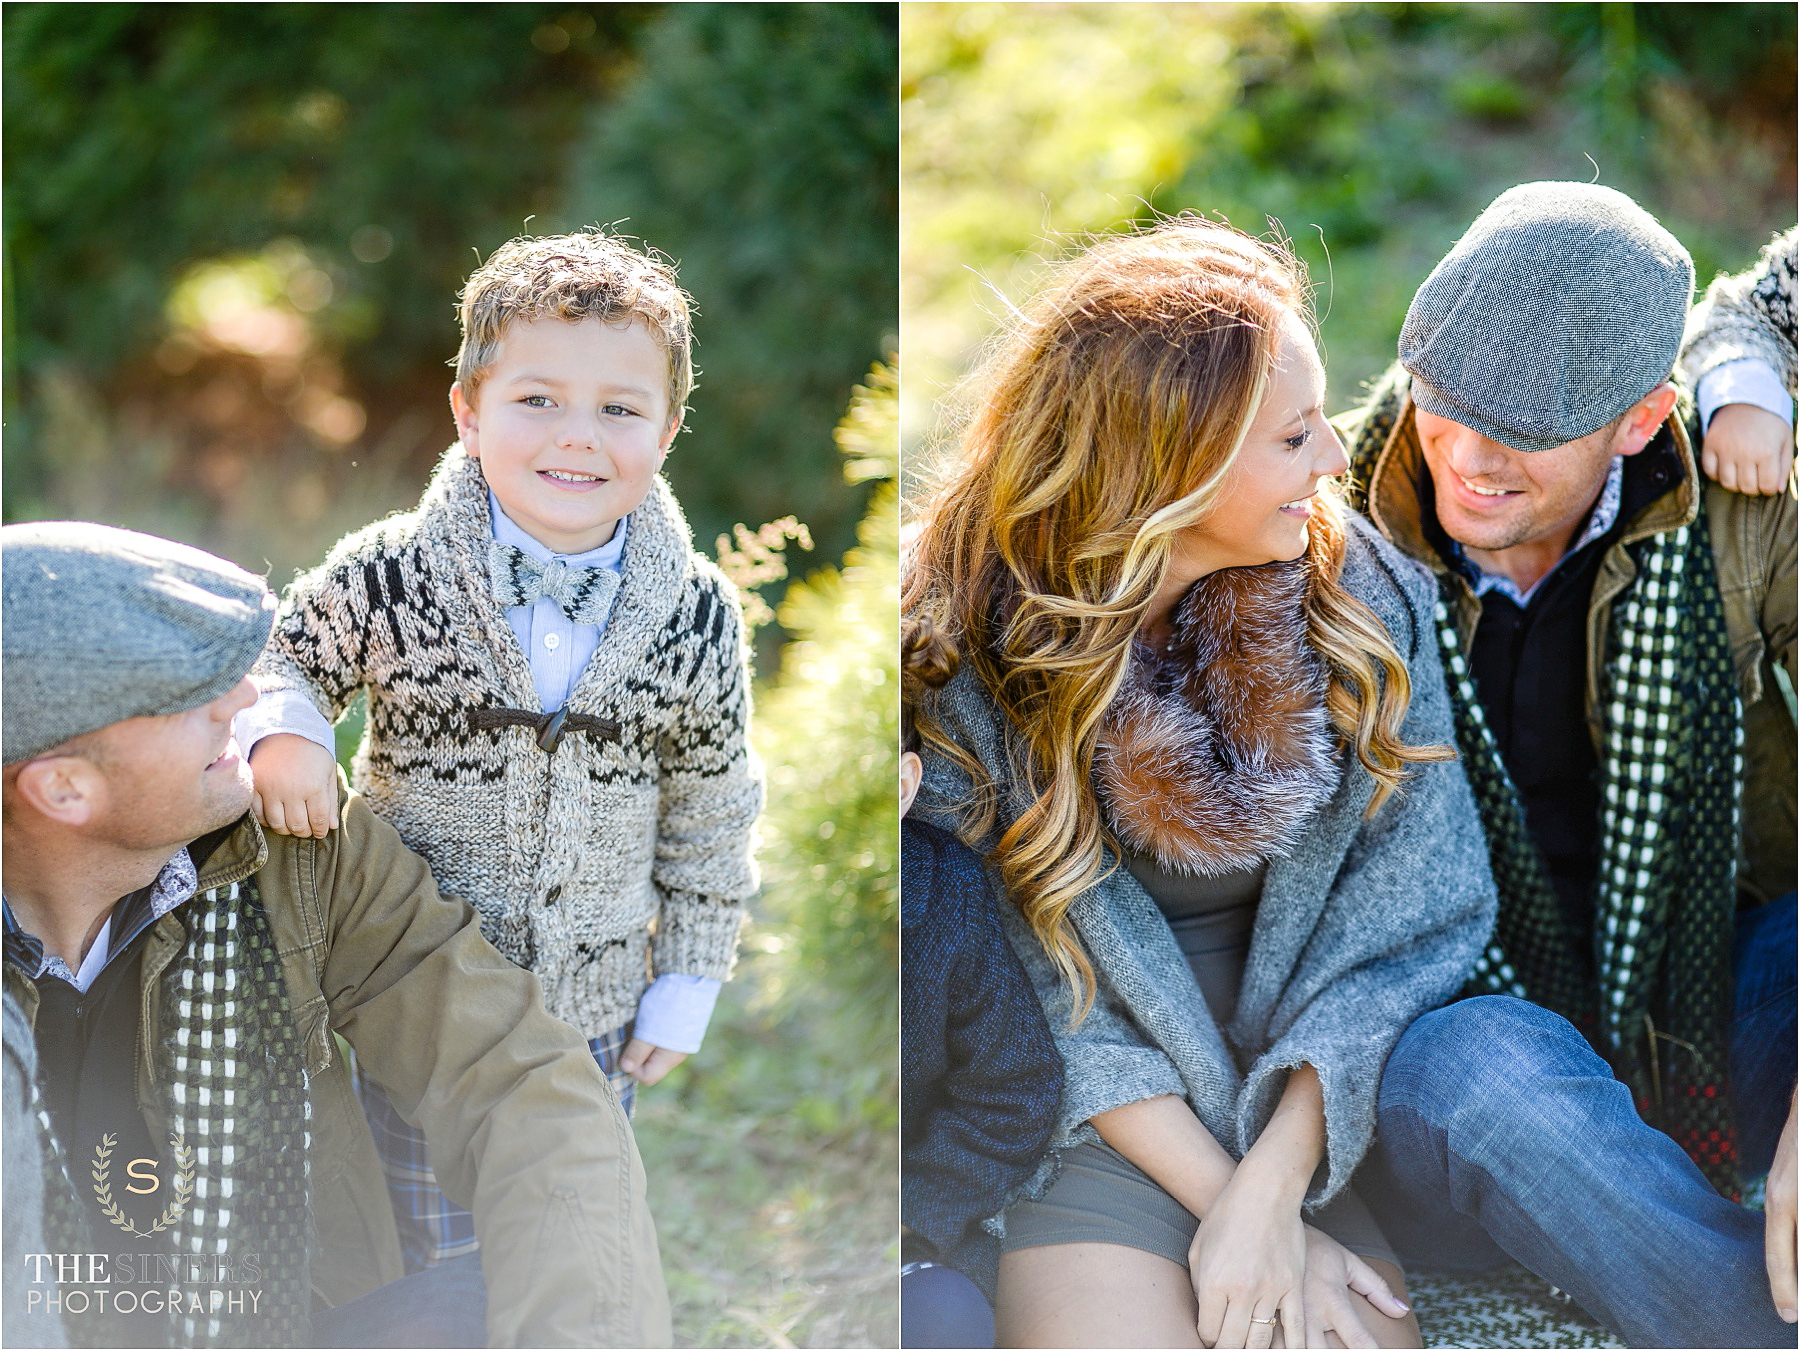 Hill Family_Indianapolis Family Photographer_TheSinersPhotography_0005